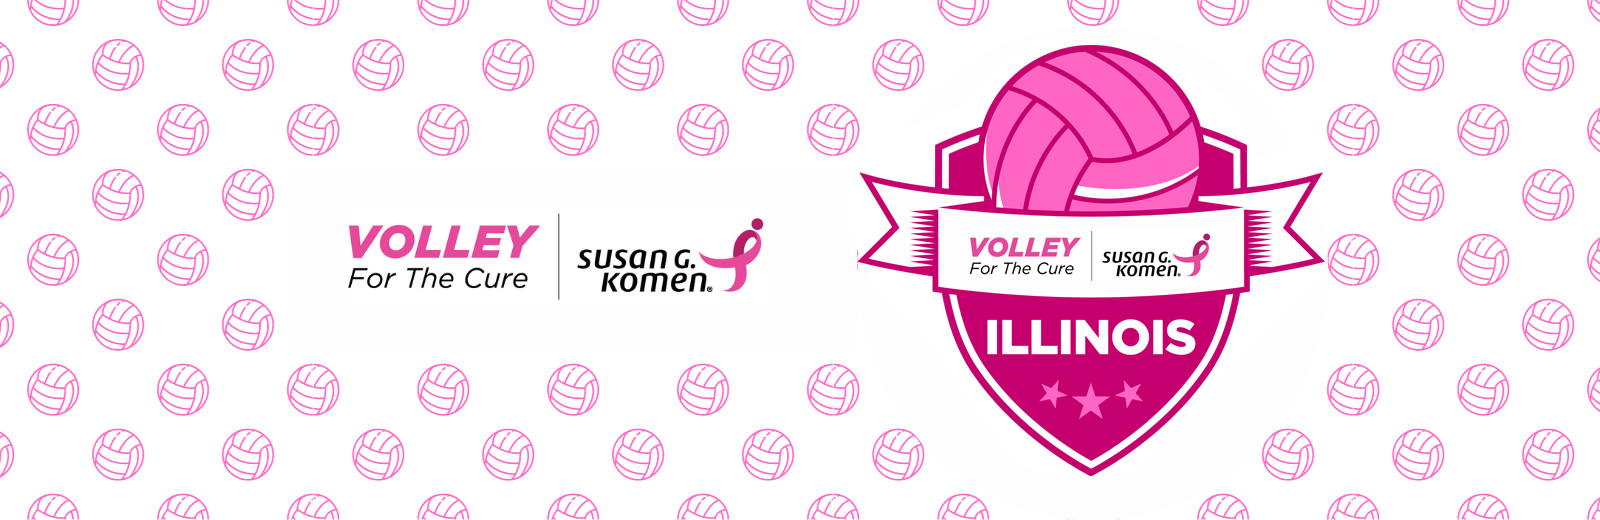 Illinois Volley for the Cure